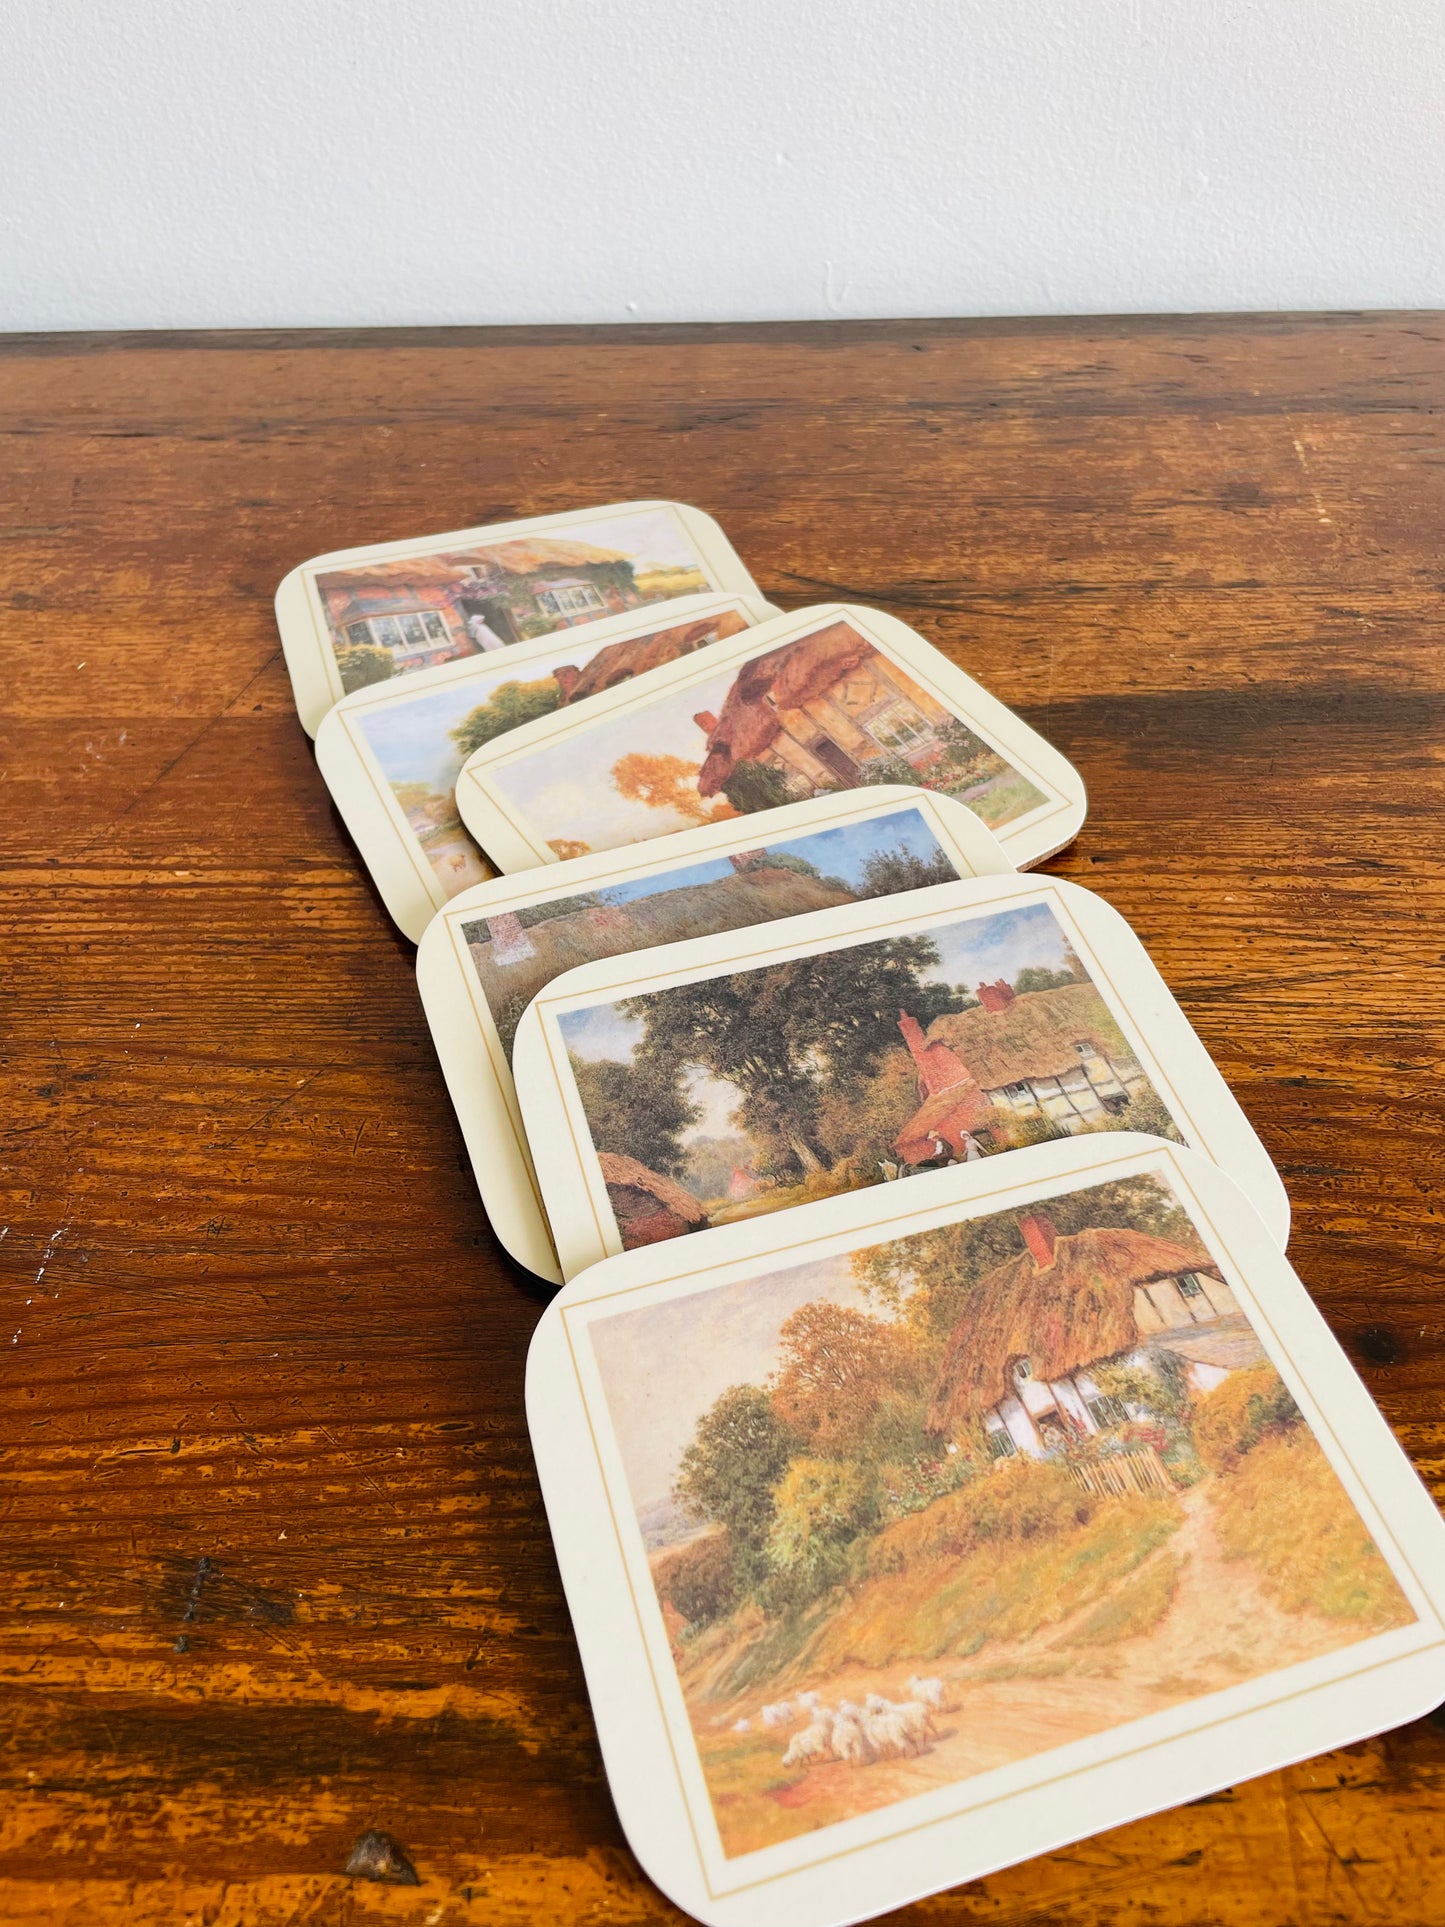 Orchard Melamine Products - Arthur Claude Strachan Rural Cottages - Set of 6 Drink Coasters - Made in England